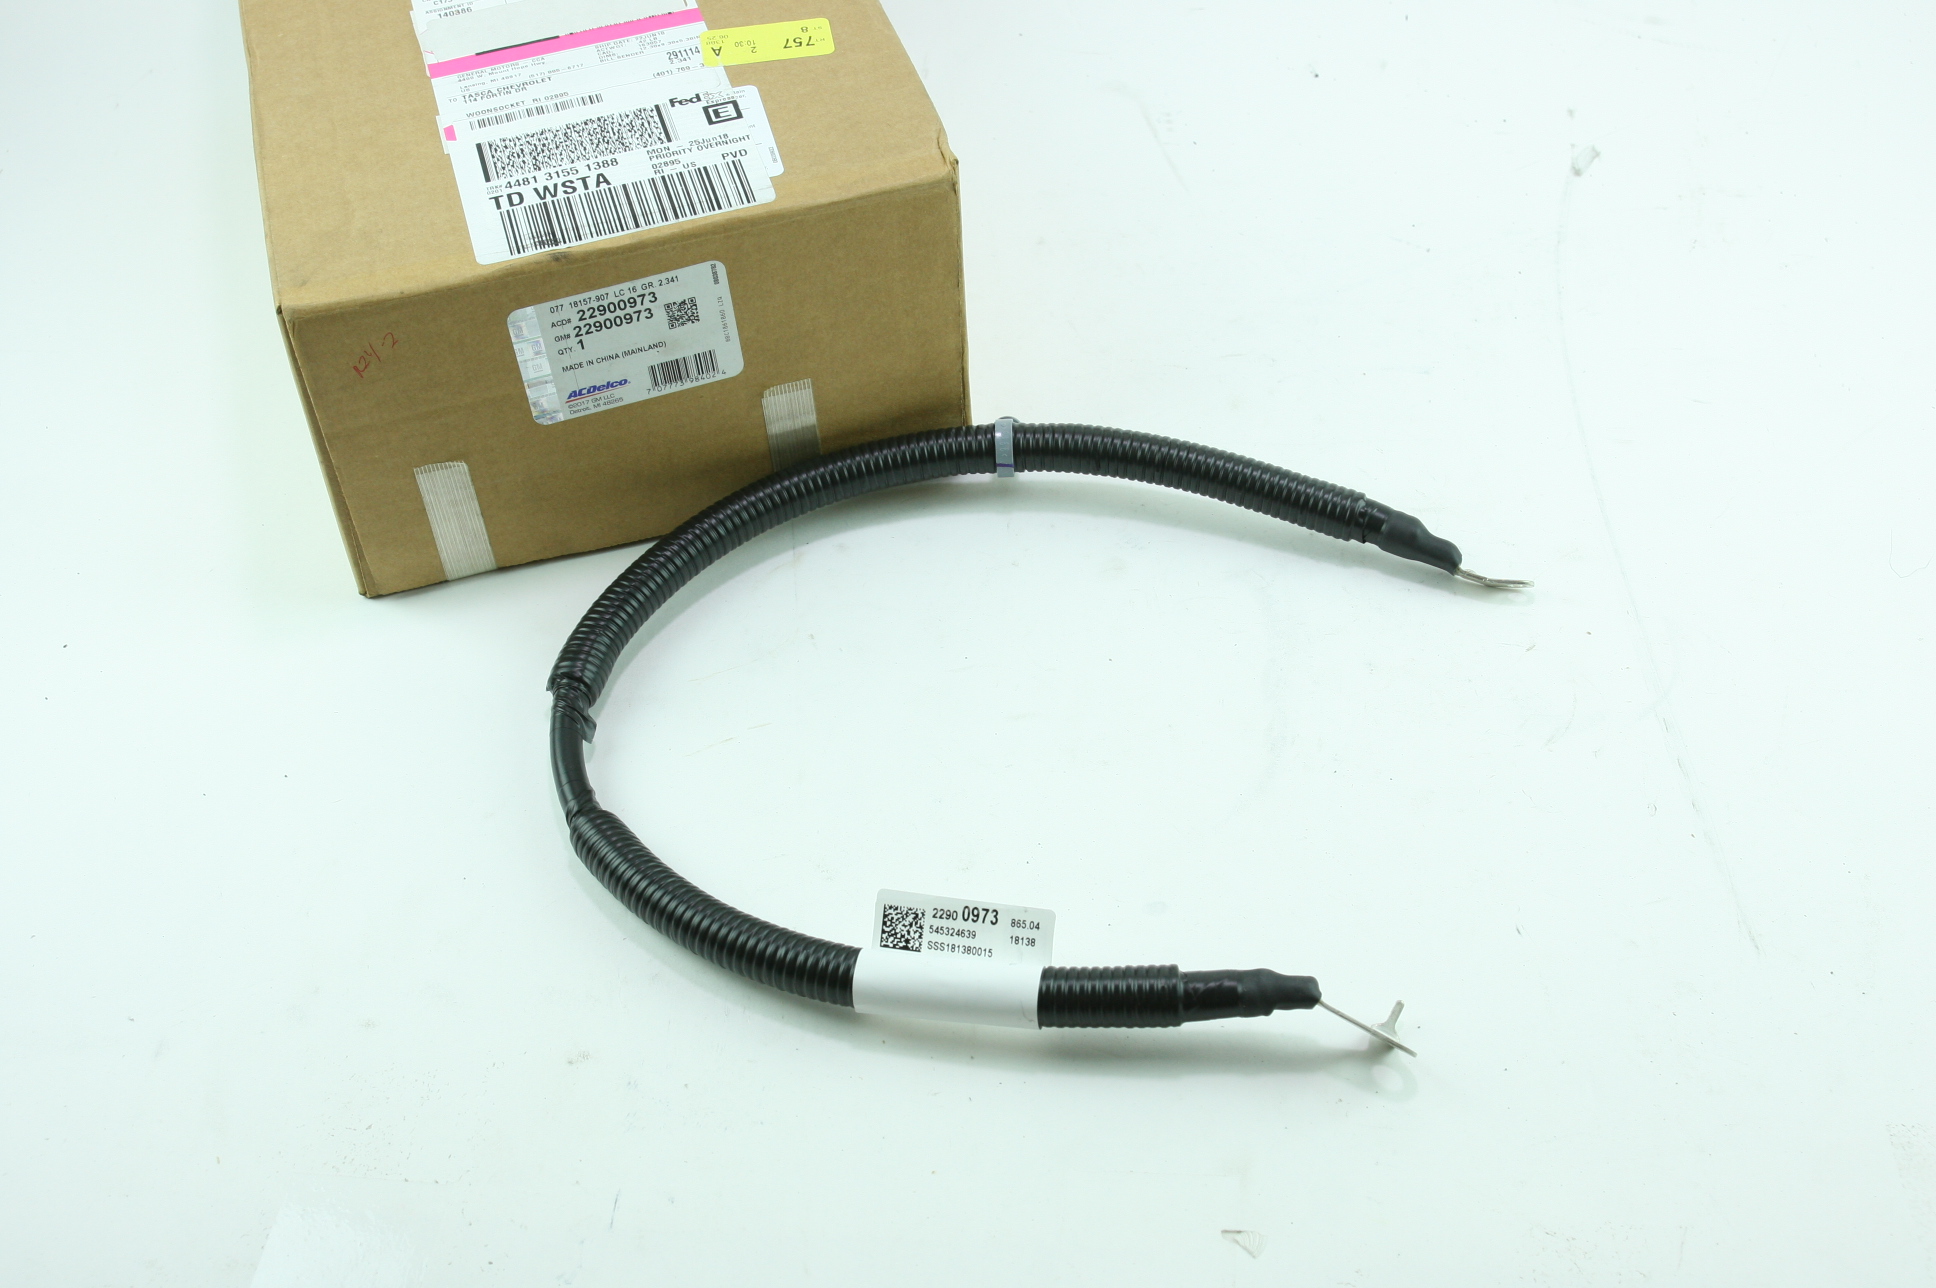 *** New Genuine OEM ACDelco Battery Negative Cable GM 22900973 Free Shipping - image 1